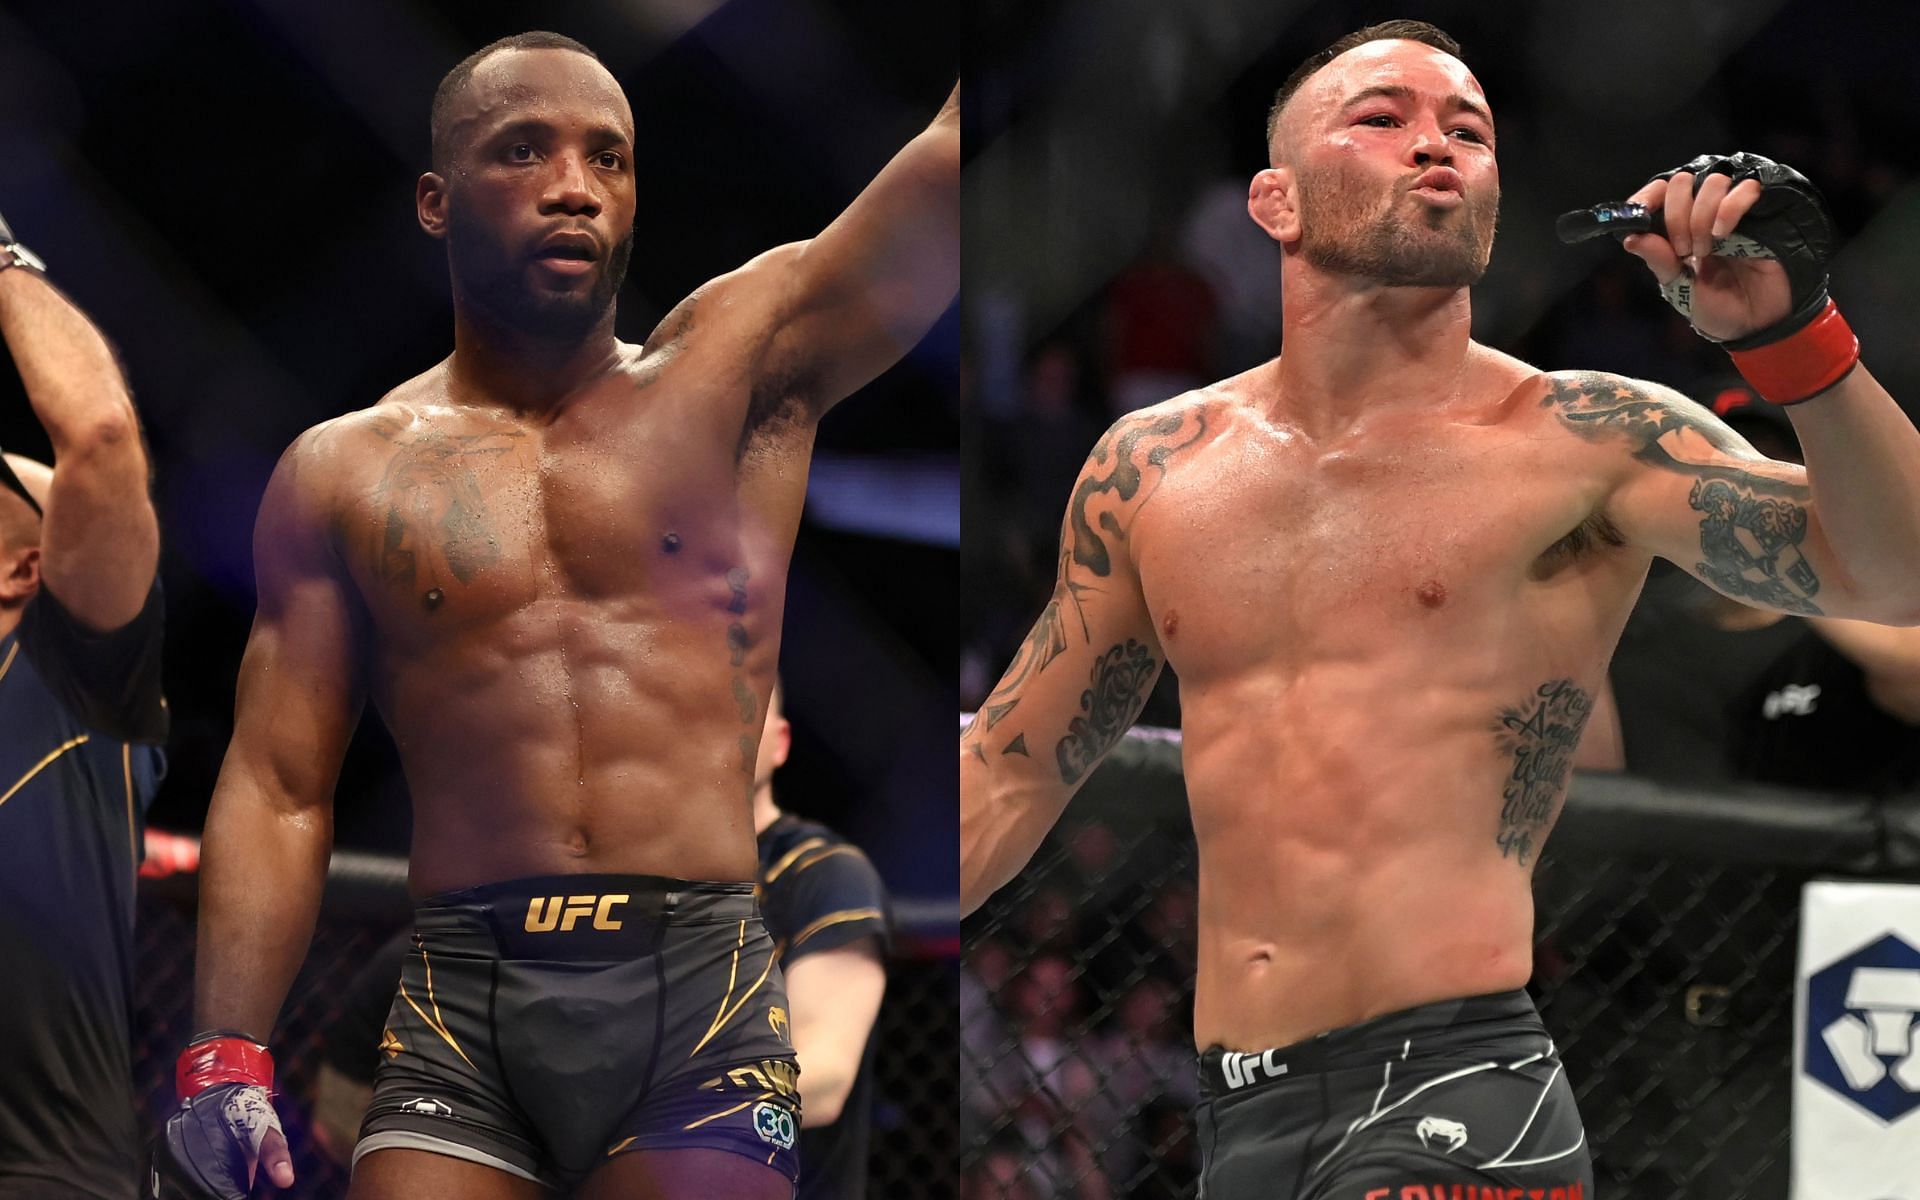 Leon Edwards (left) and Colby Covington (right) [Images courtesy: Getty Images]